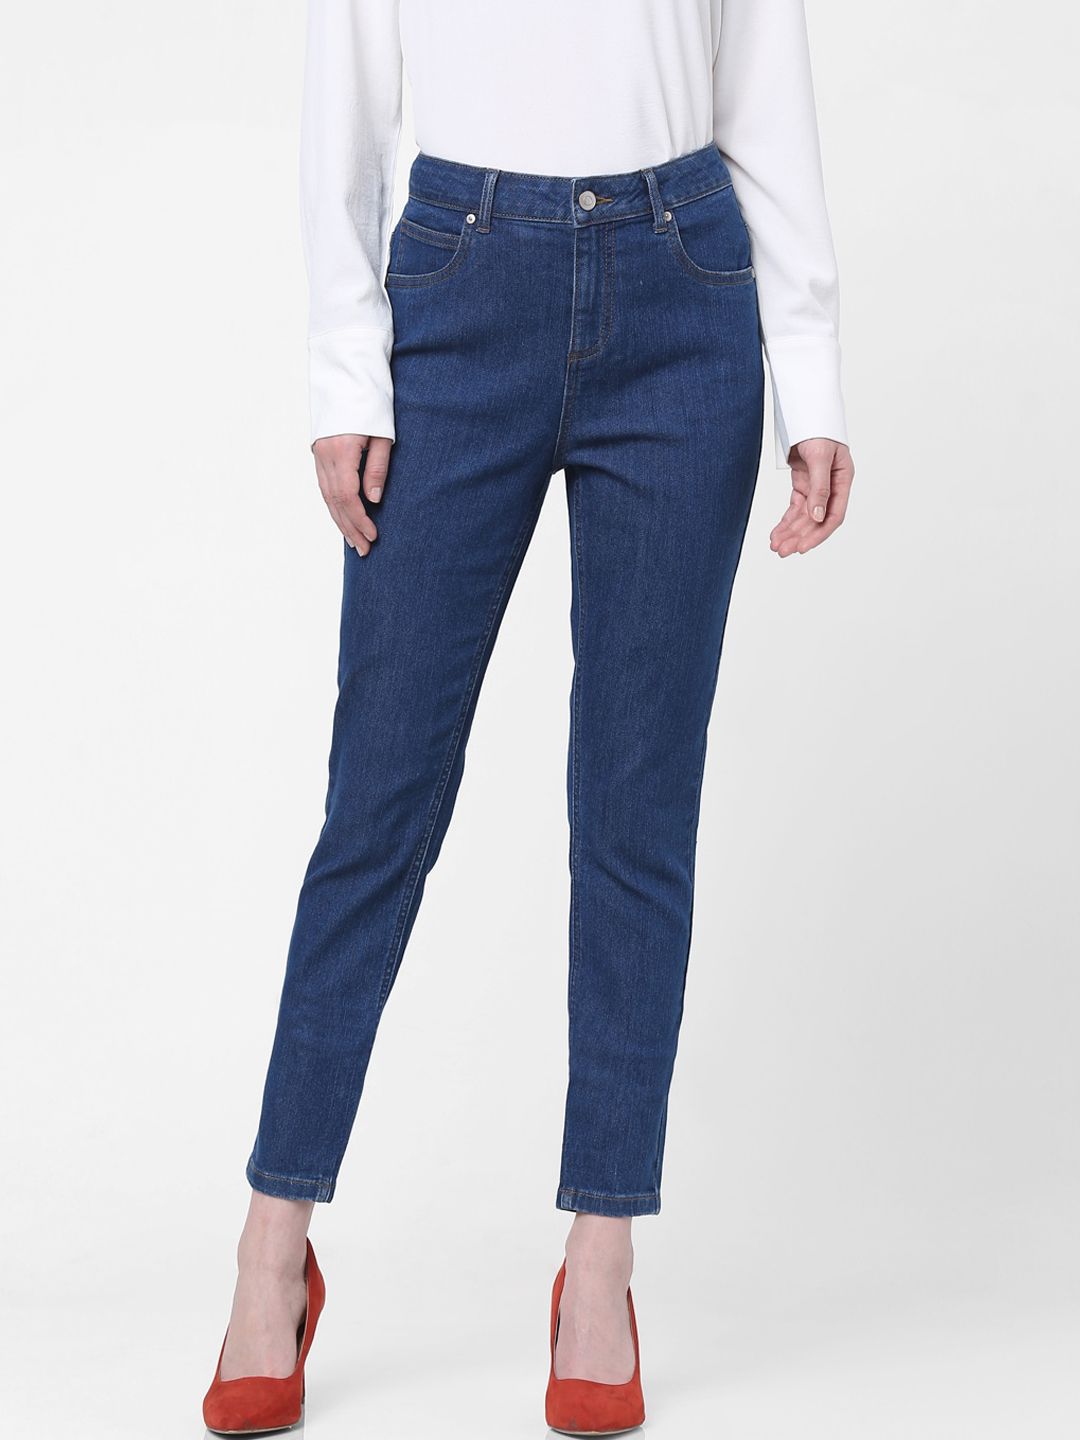 Vero Moda Women Blue Skinny Fit High-Rise Stretchable Jeans Price in India